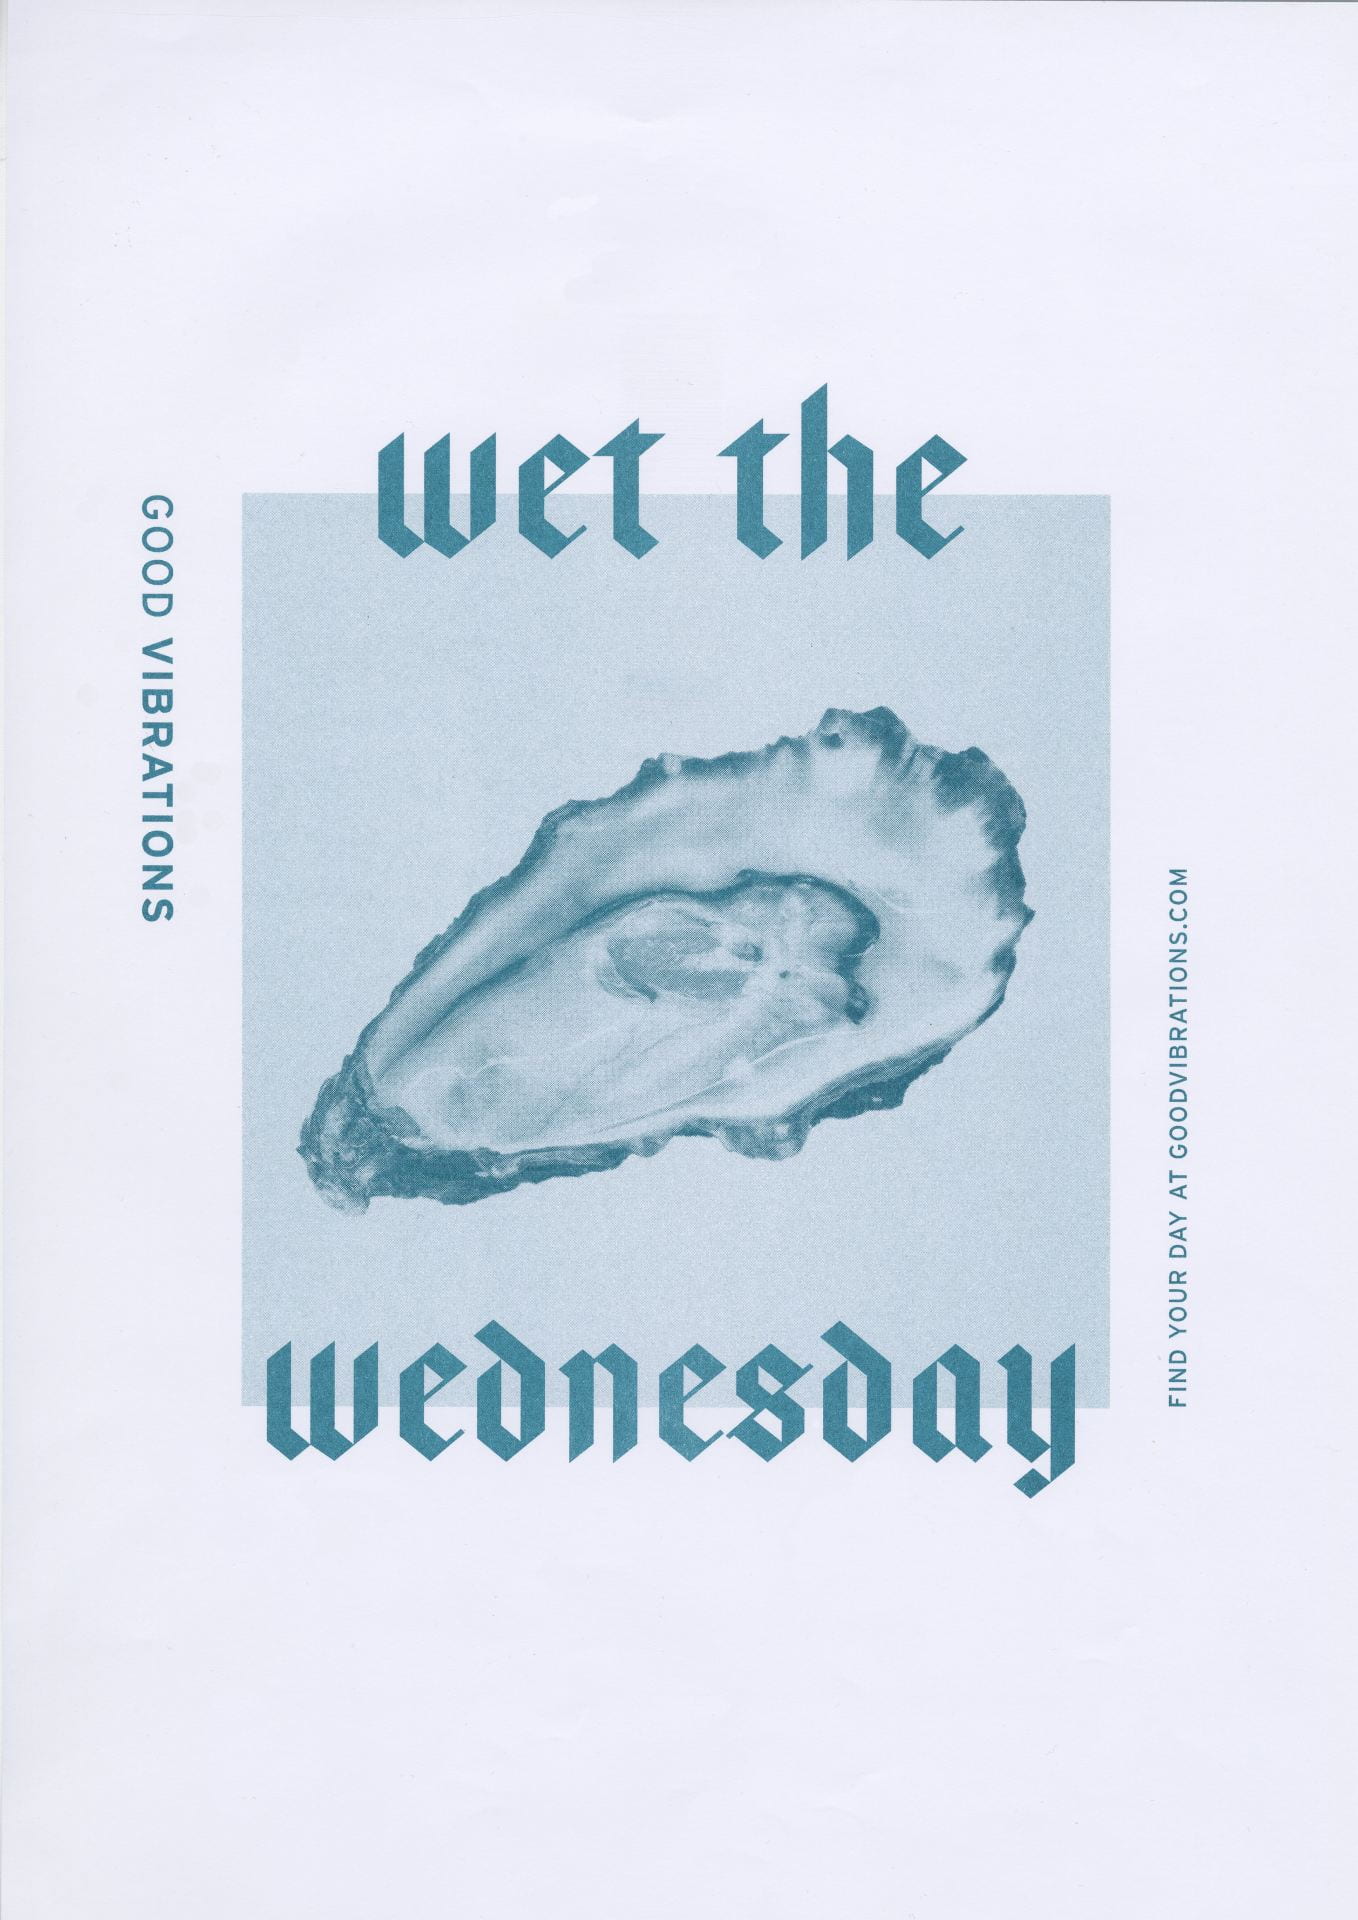 Wet the wednesday poster in blue tones with an oyster shell